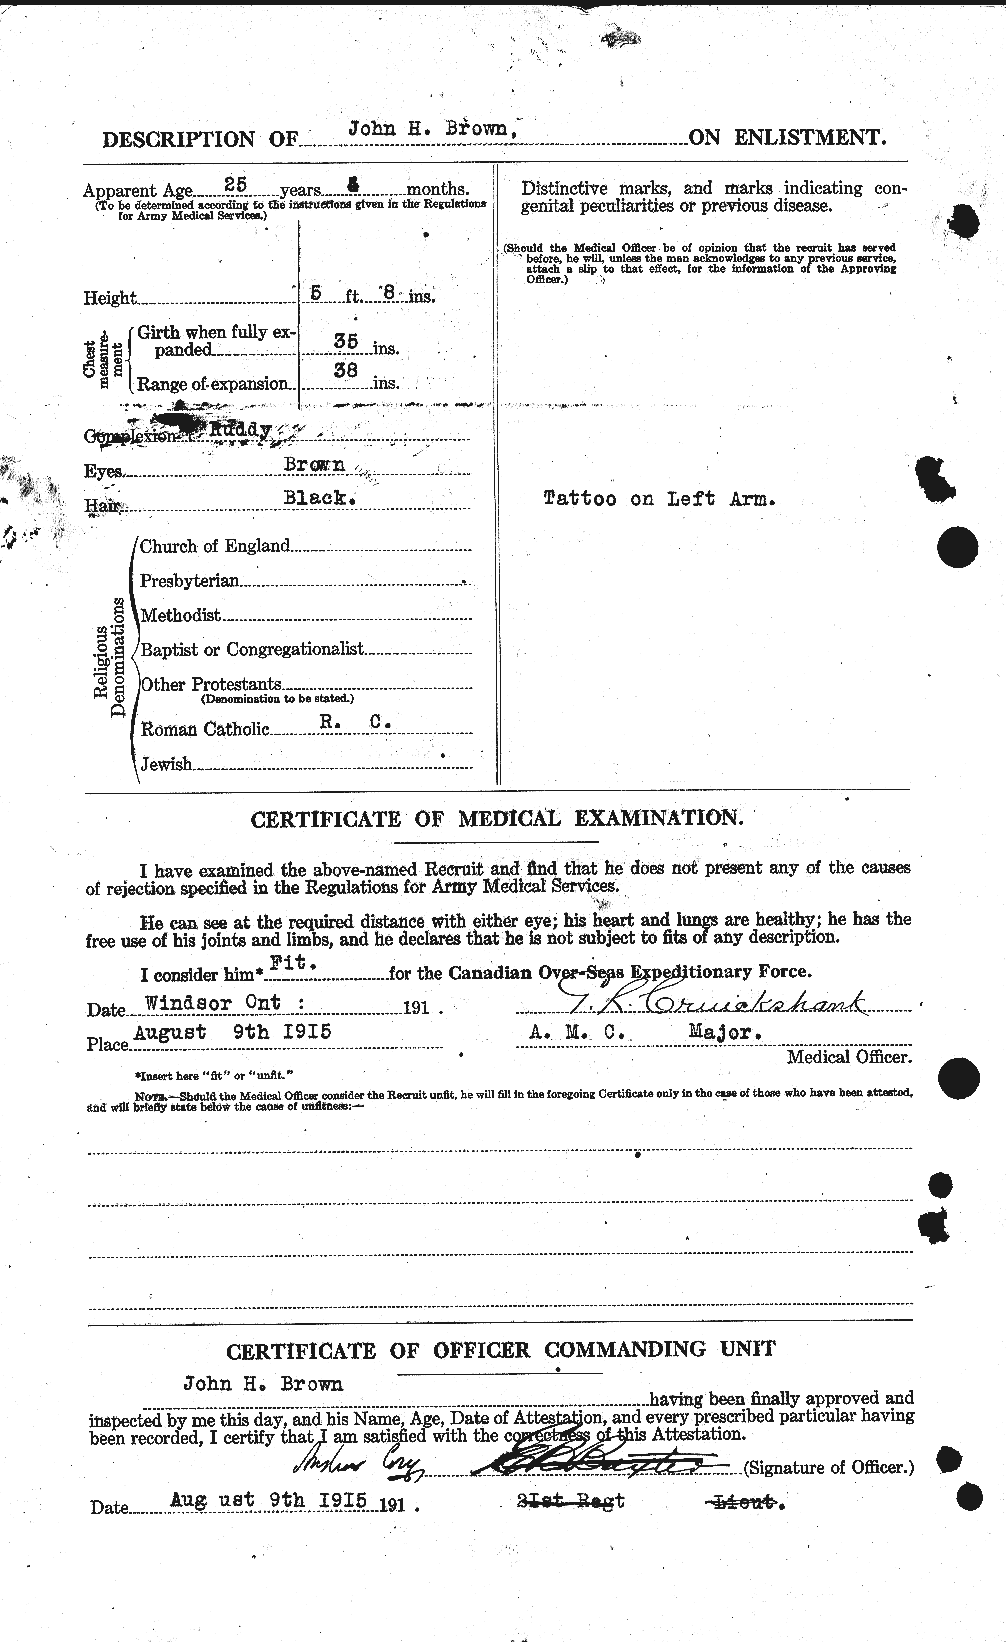 Personnel Records of the First World War - CEF 264603b